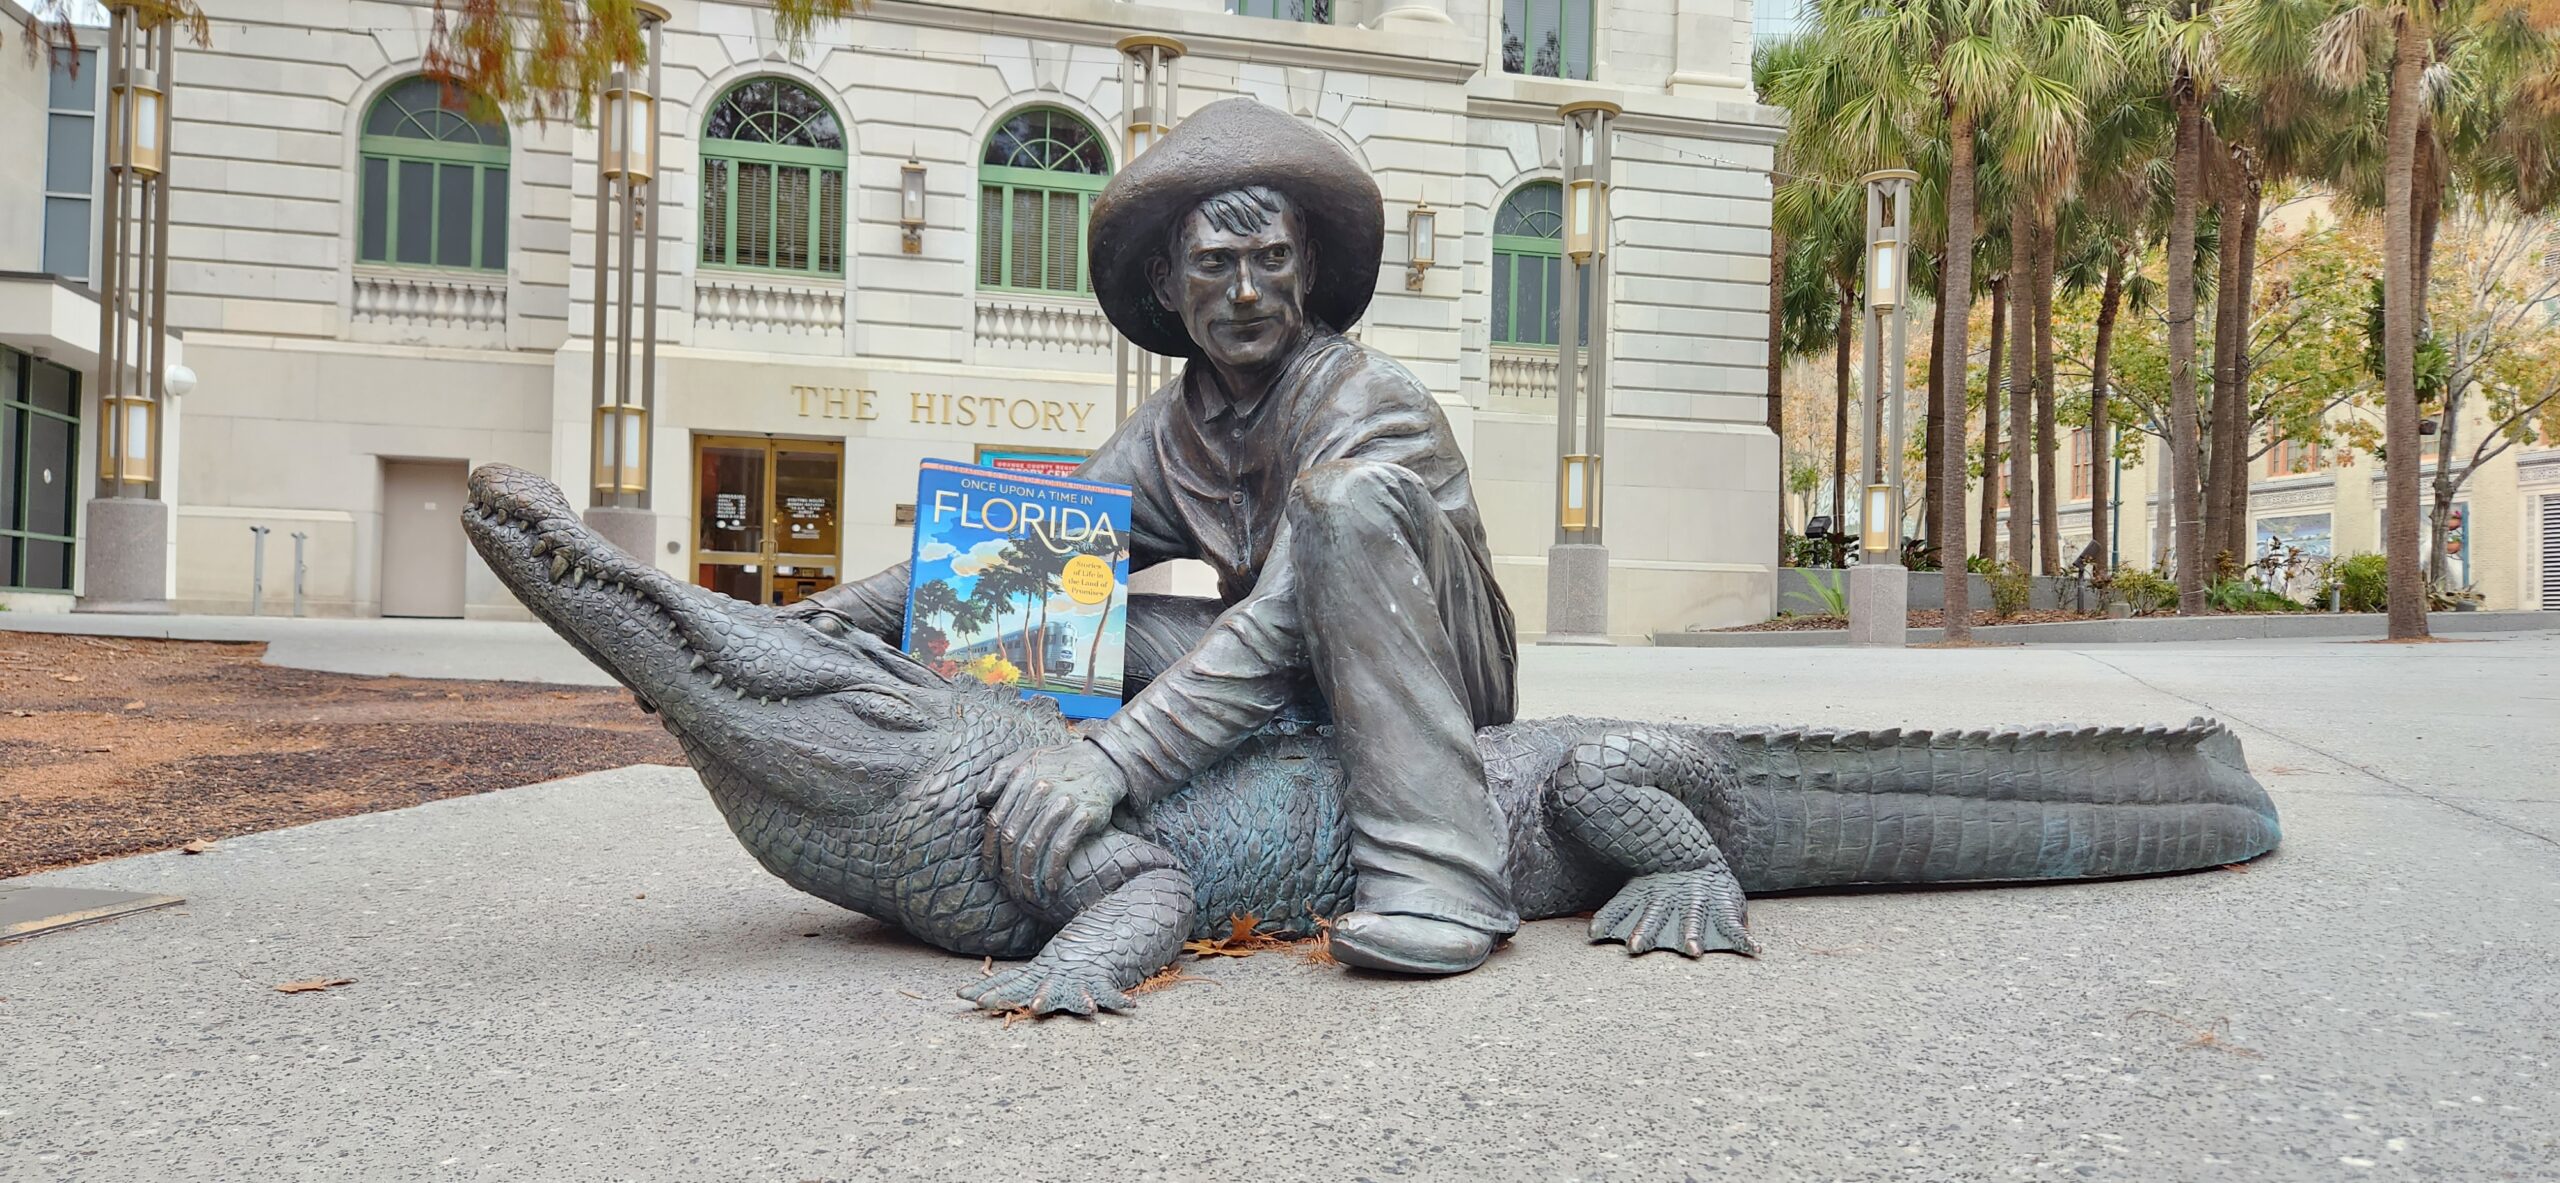 The book "Once Upon a Time in Florida" on top of a bronze statue of a man sitting on an alligator, located in Heritage Square in front of the Orange County Regional History Center.